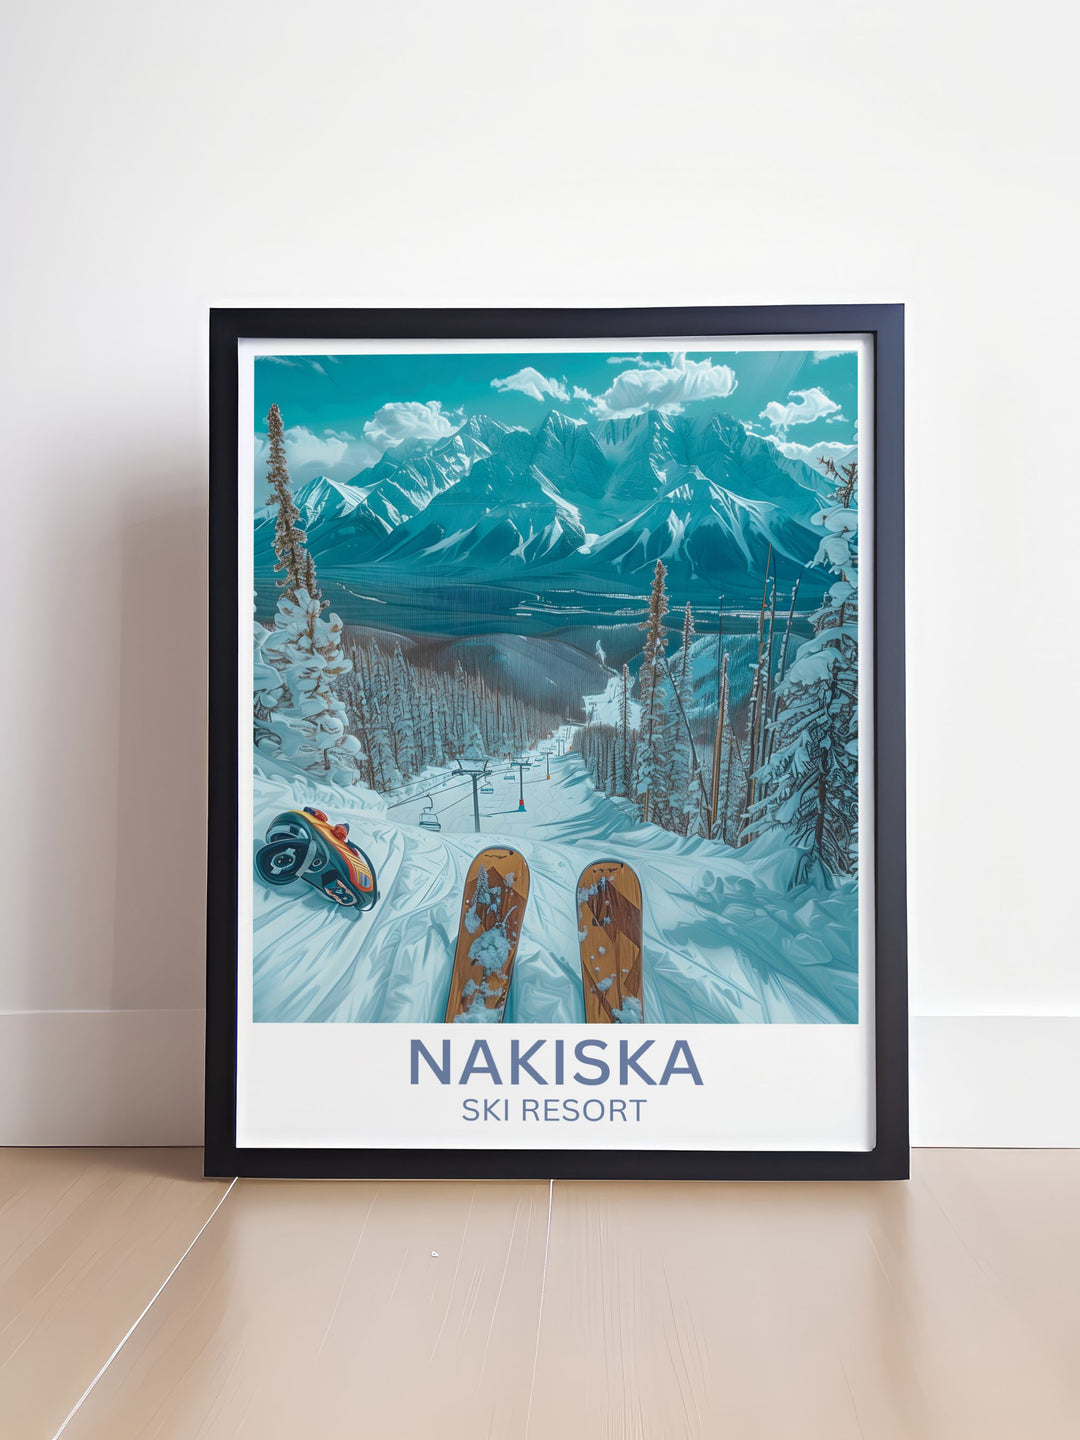 Canvas art of Kananaskis Valley showing the peaceful river and mountain scenery, ideal for nature lovers.